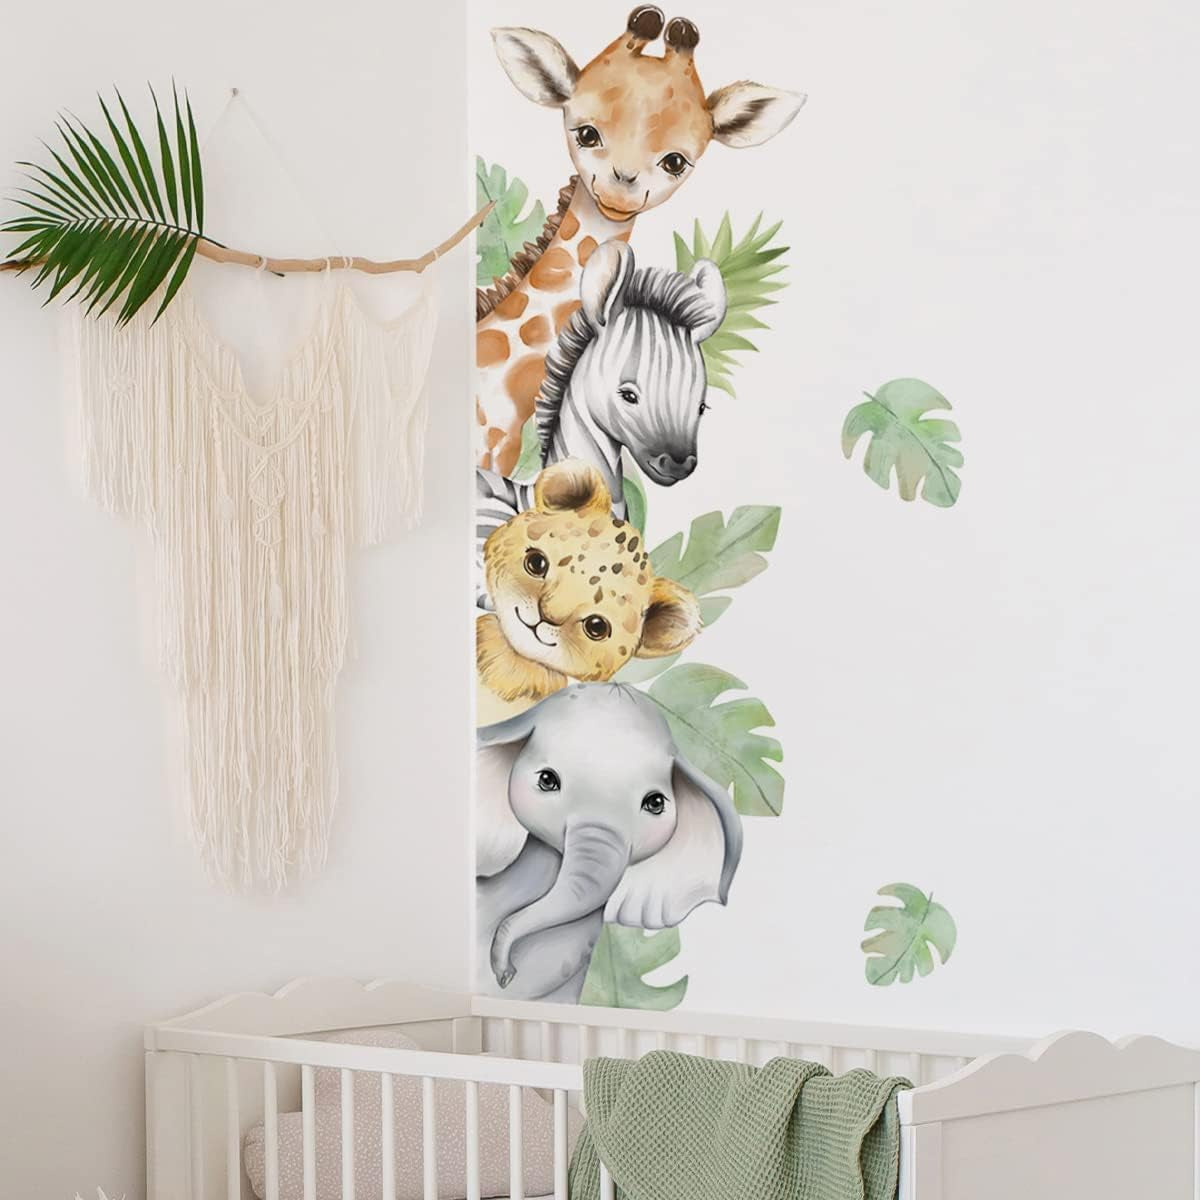 44.88 X 11.75 Inch Watercolor Jungle Animal Wall Decals Forest Animal Wall Sticker Elephant Lion Monkey Wall Decals for Baby Nursery Playroom Bedroom Classroom Kindergarten Wall Decor